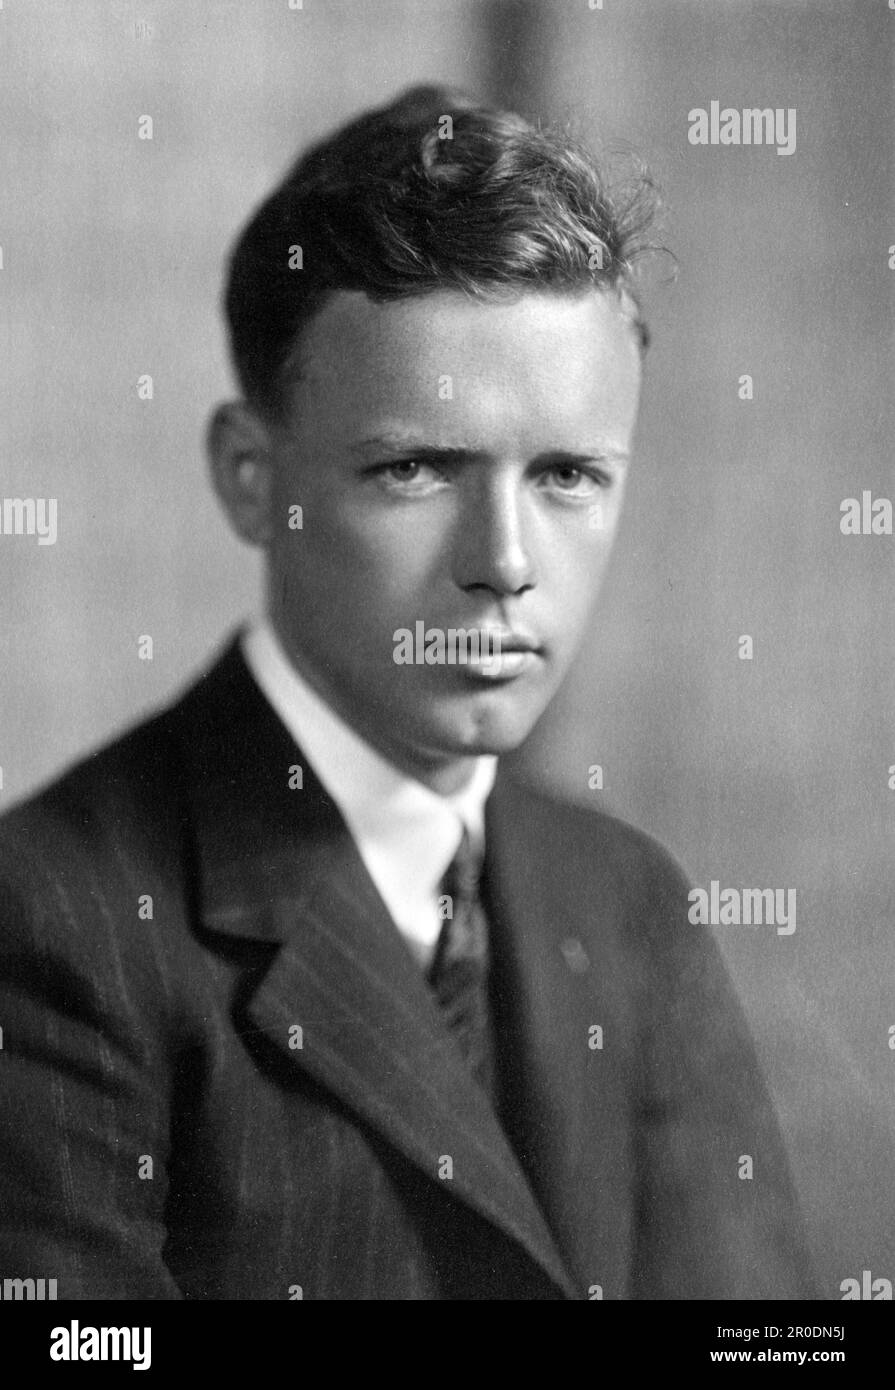 Charles Lindbergh (1902-1974), the American aviator famous for his first non-stop solo flight across the Atlantic in 1927. Photo by Harris & Ewing Studio, 1927 Stock Photo